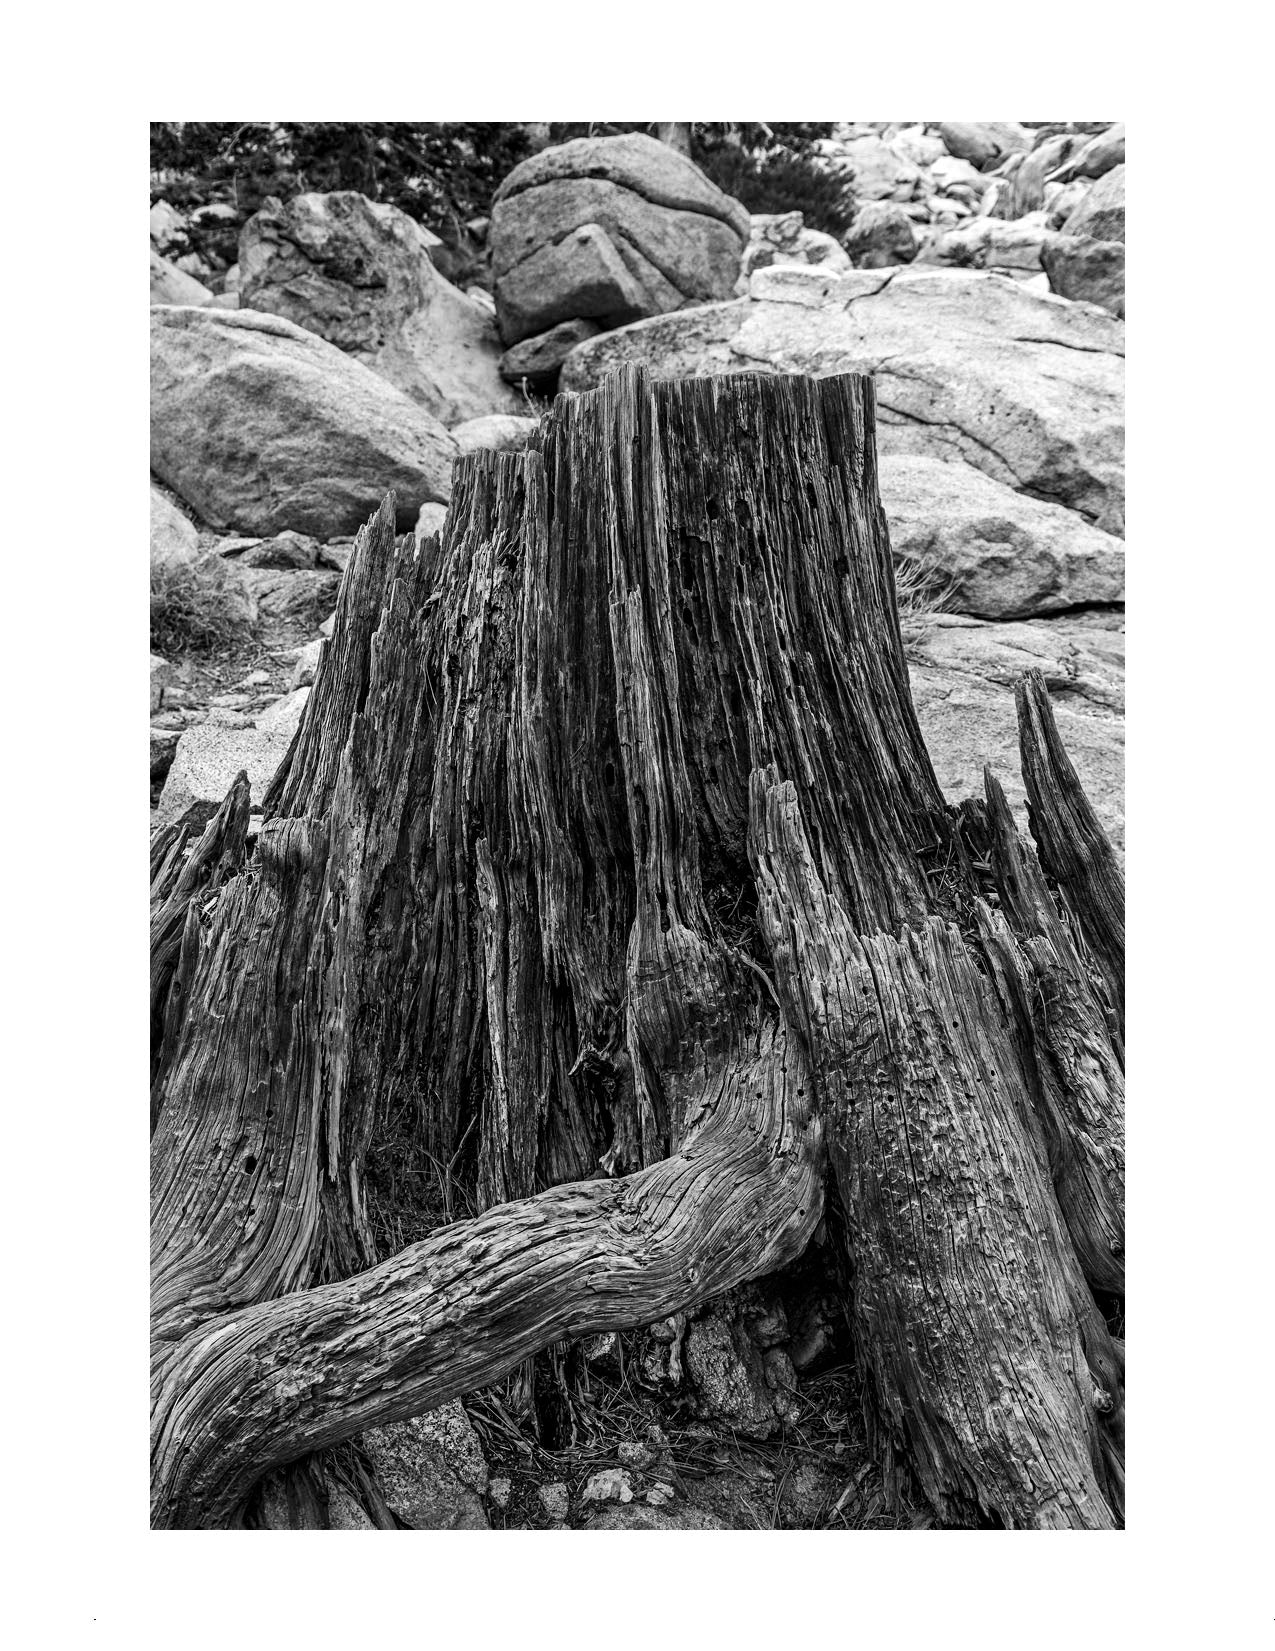 Black and white photo of a stump